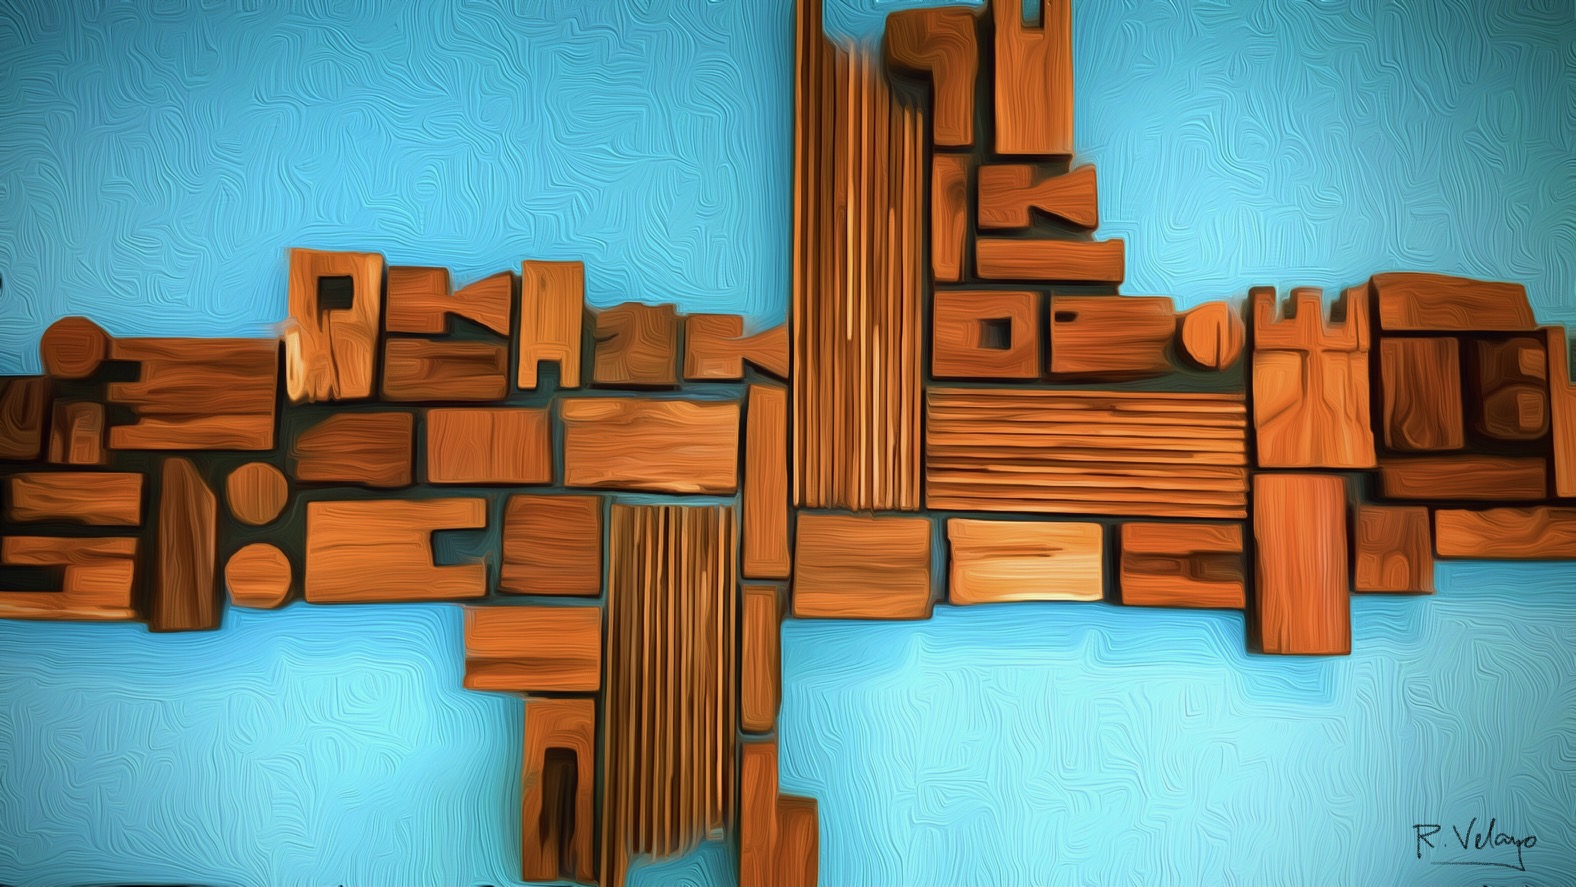 "WOOD SCULPTURE ON TURQUOISE BACKGROUND" [Created: 6/22/2021]